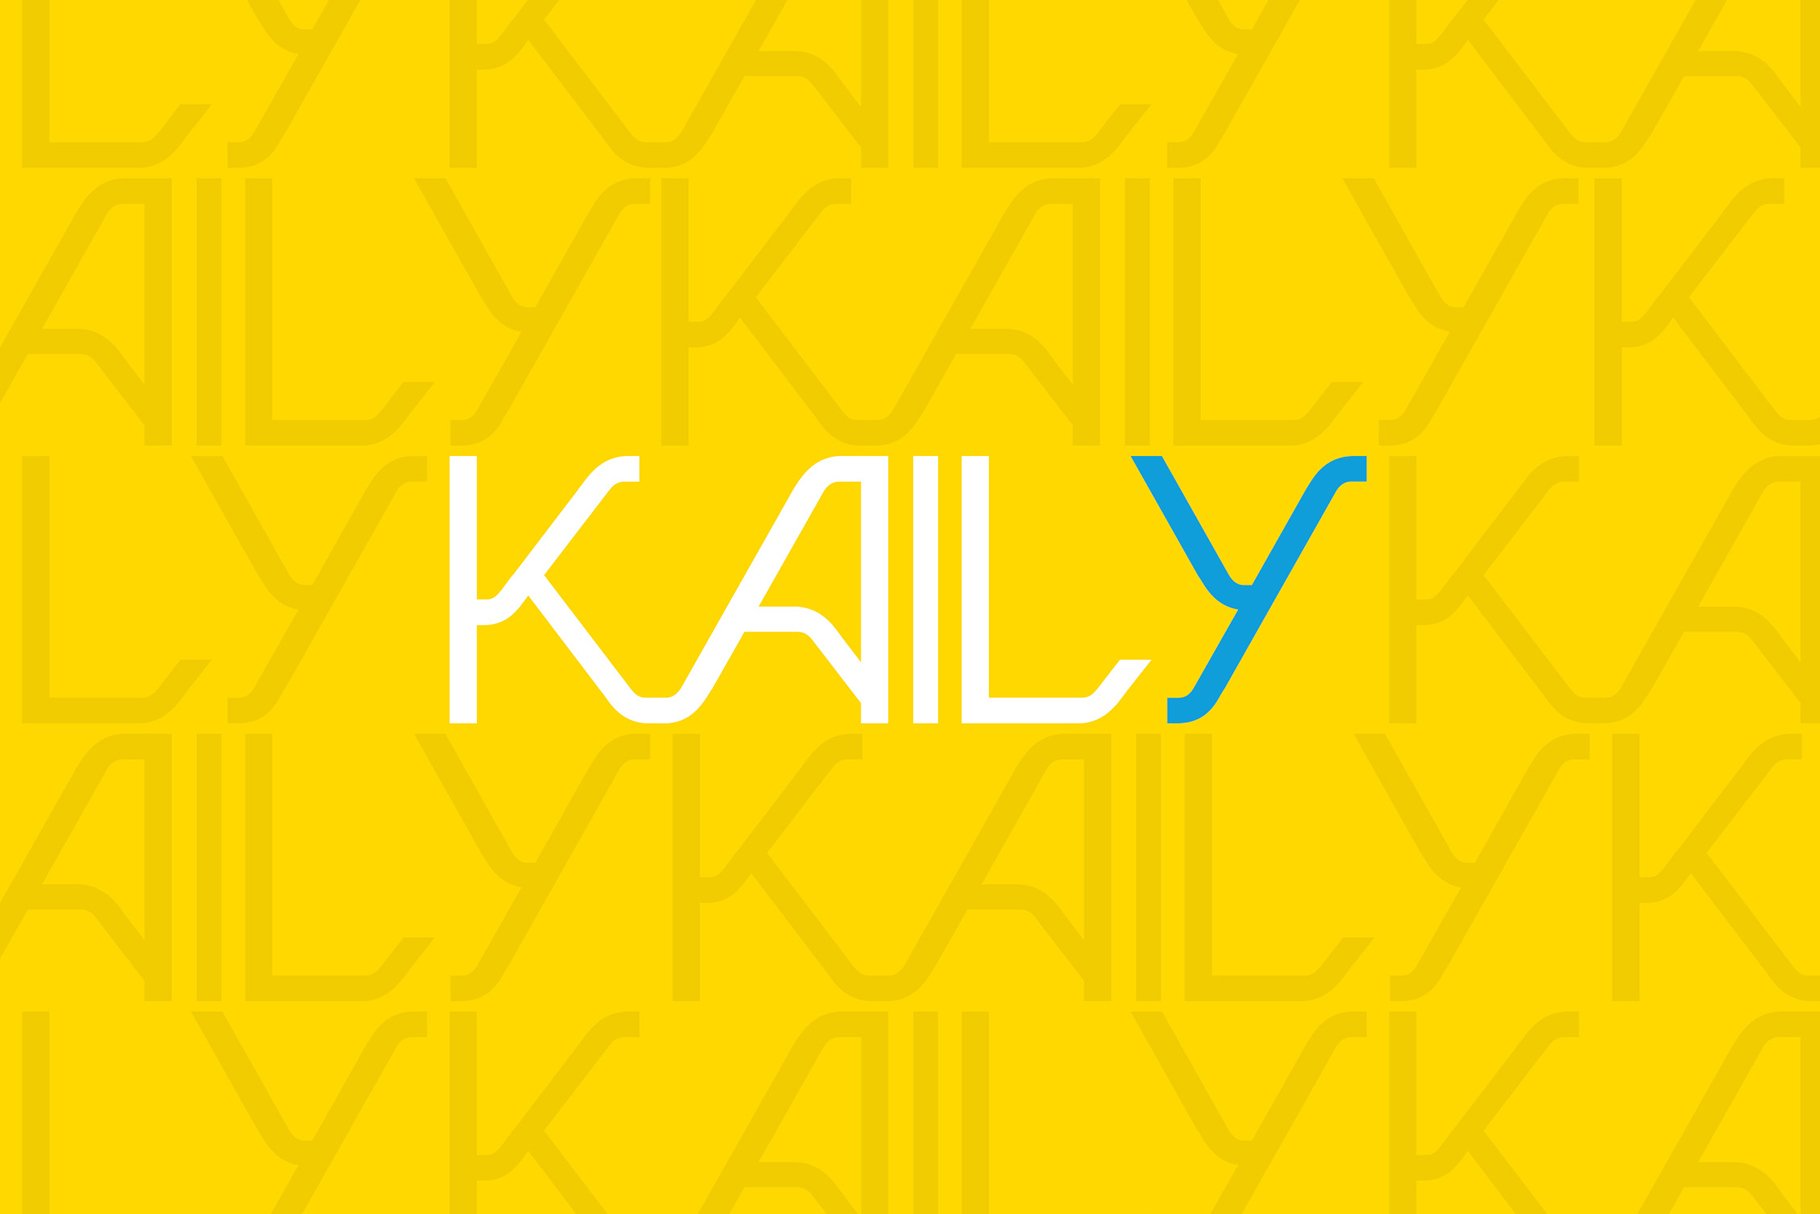 Kaily cover image.